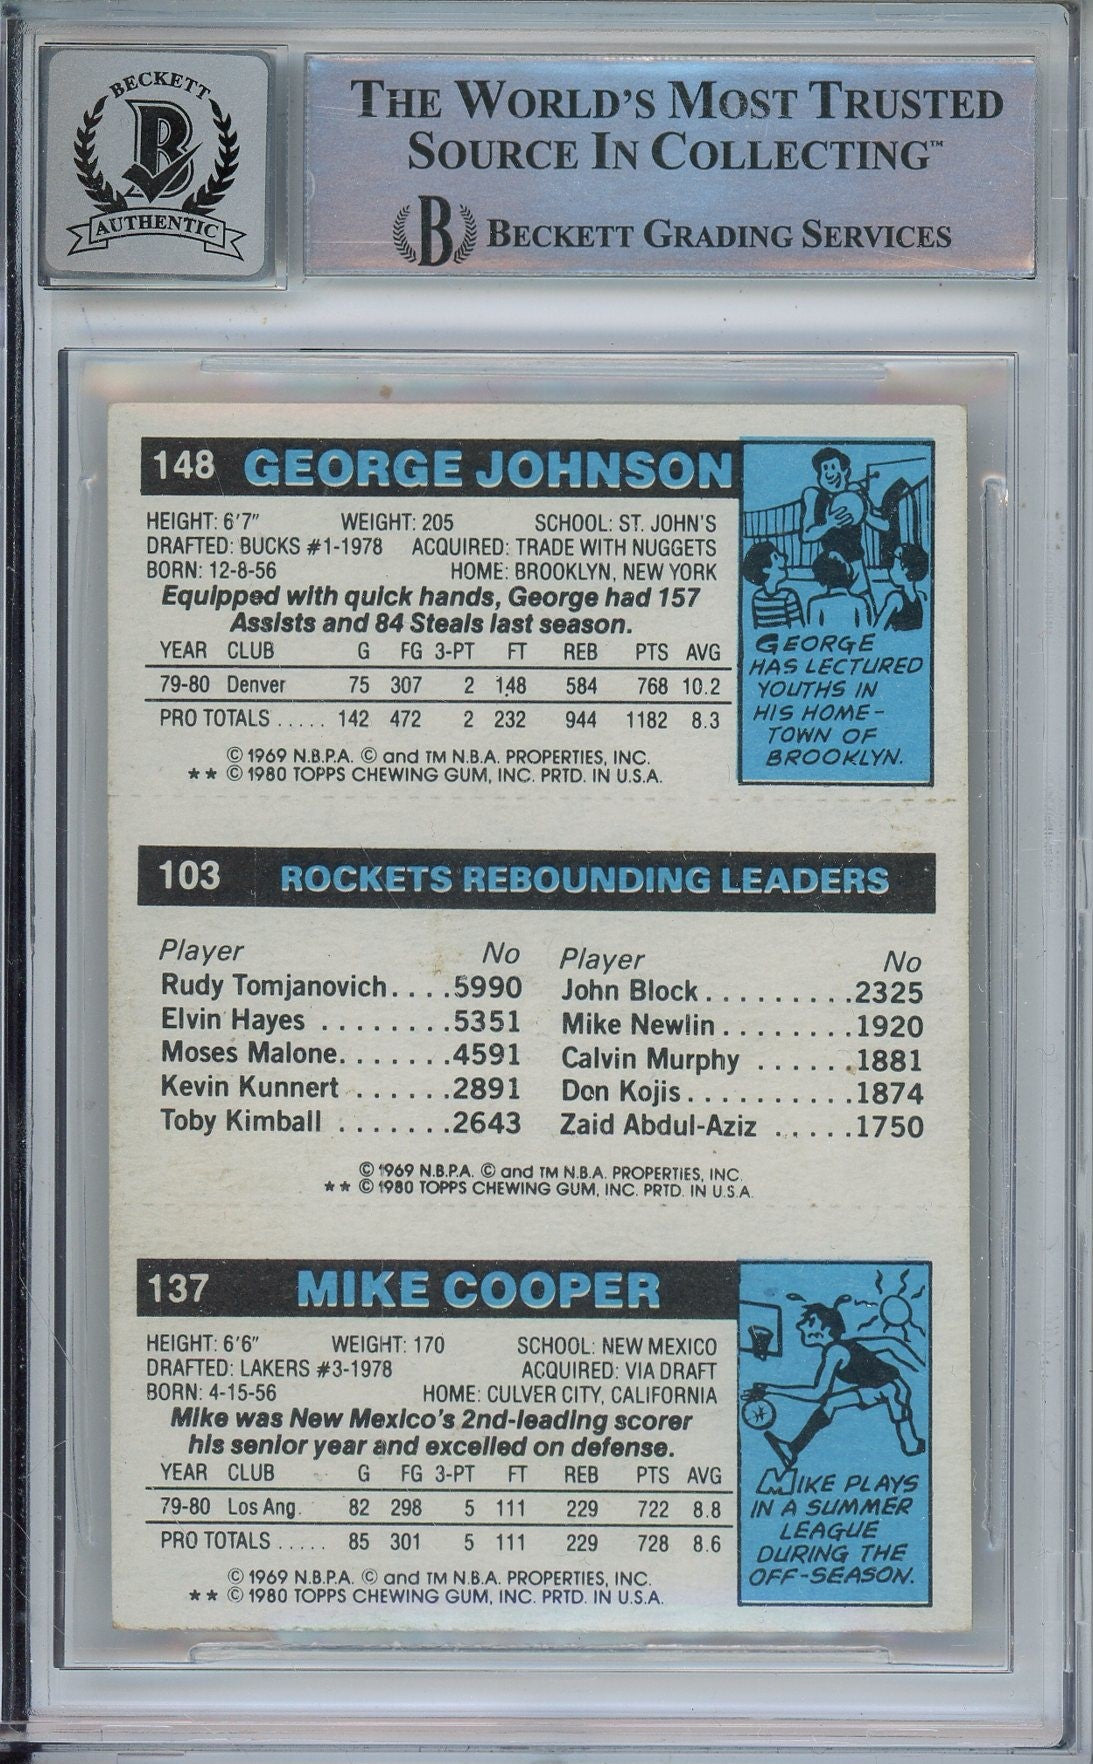 1980 TOPPS MIKE MICHAEL COOPER BAS RC ROOKIE AUTO CARD (9057)